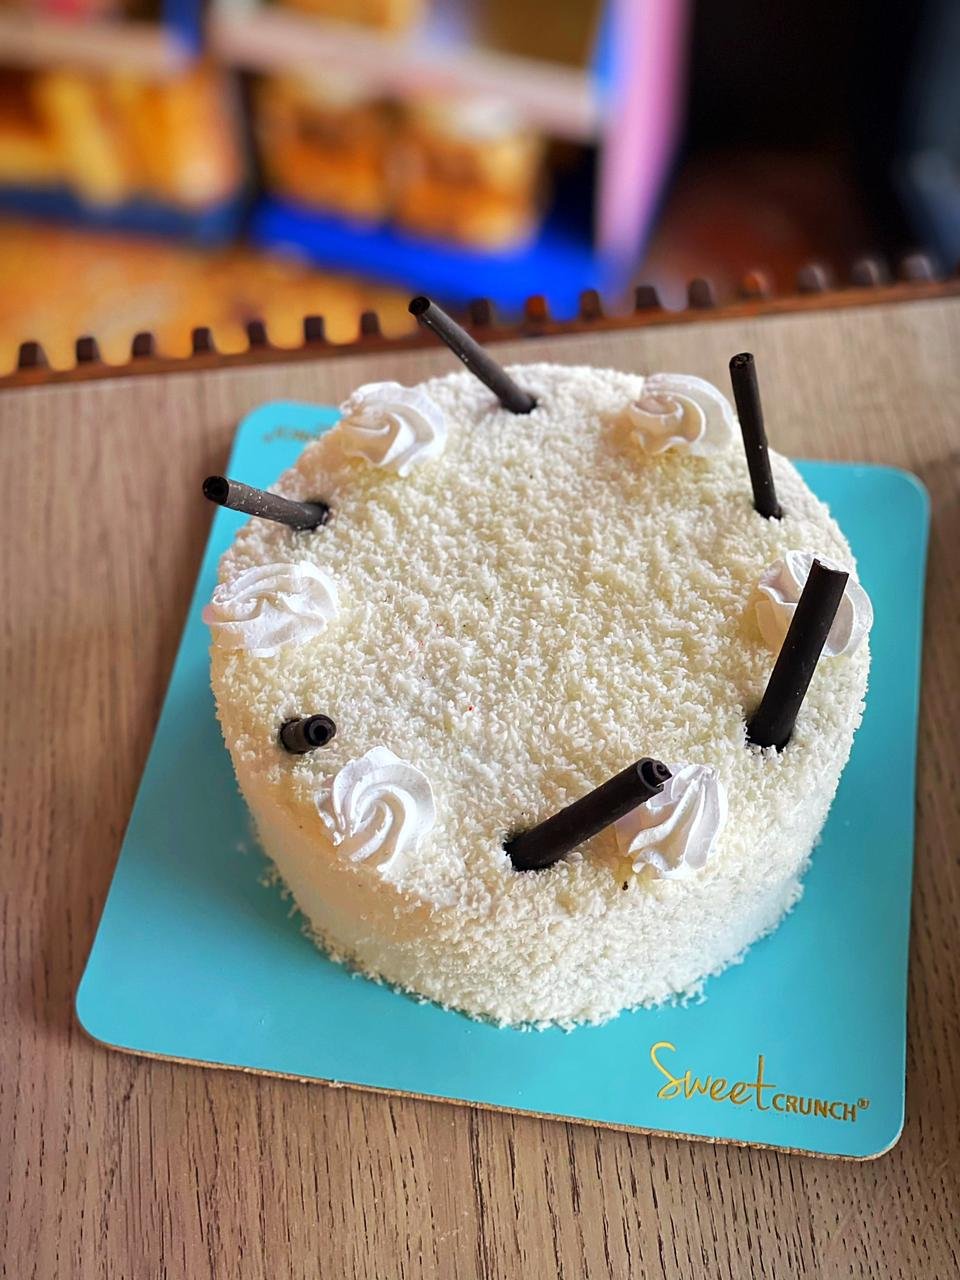 The BEST Coconut Cake Recipe You'll Ever Make! - Home. Made. Interest.